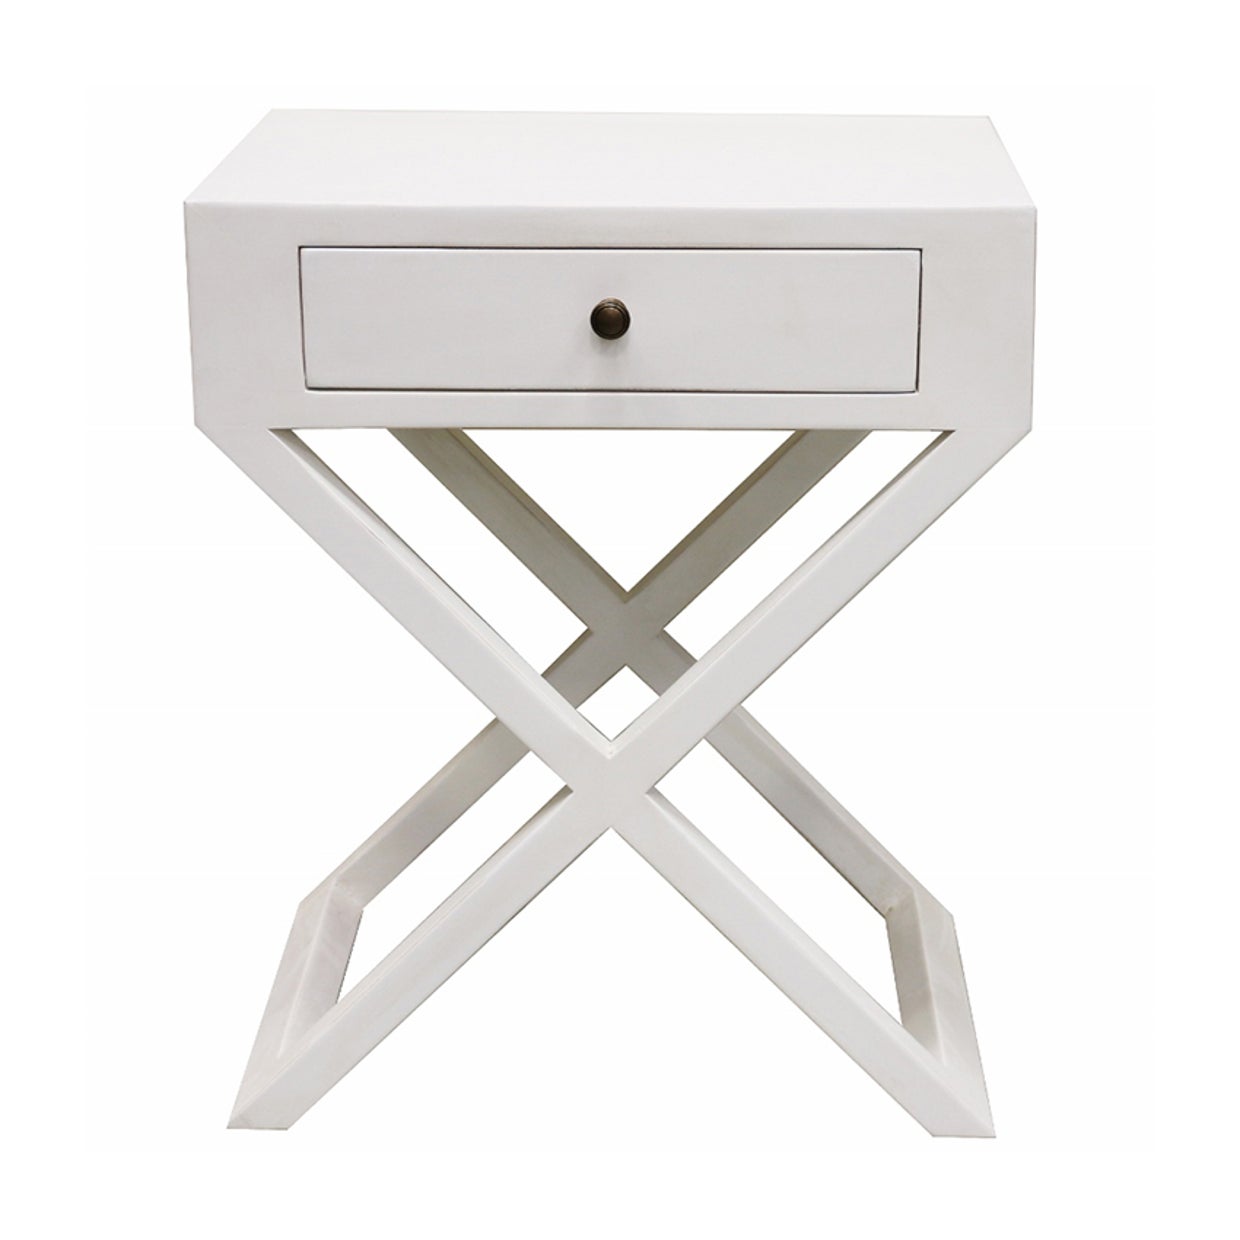 ITALIA RIVIERA WHITE BEDSIDE TABLE WITH CROSS LEGS